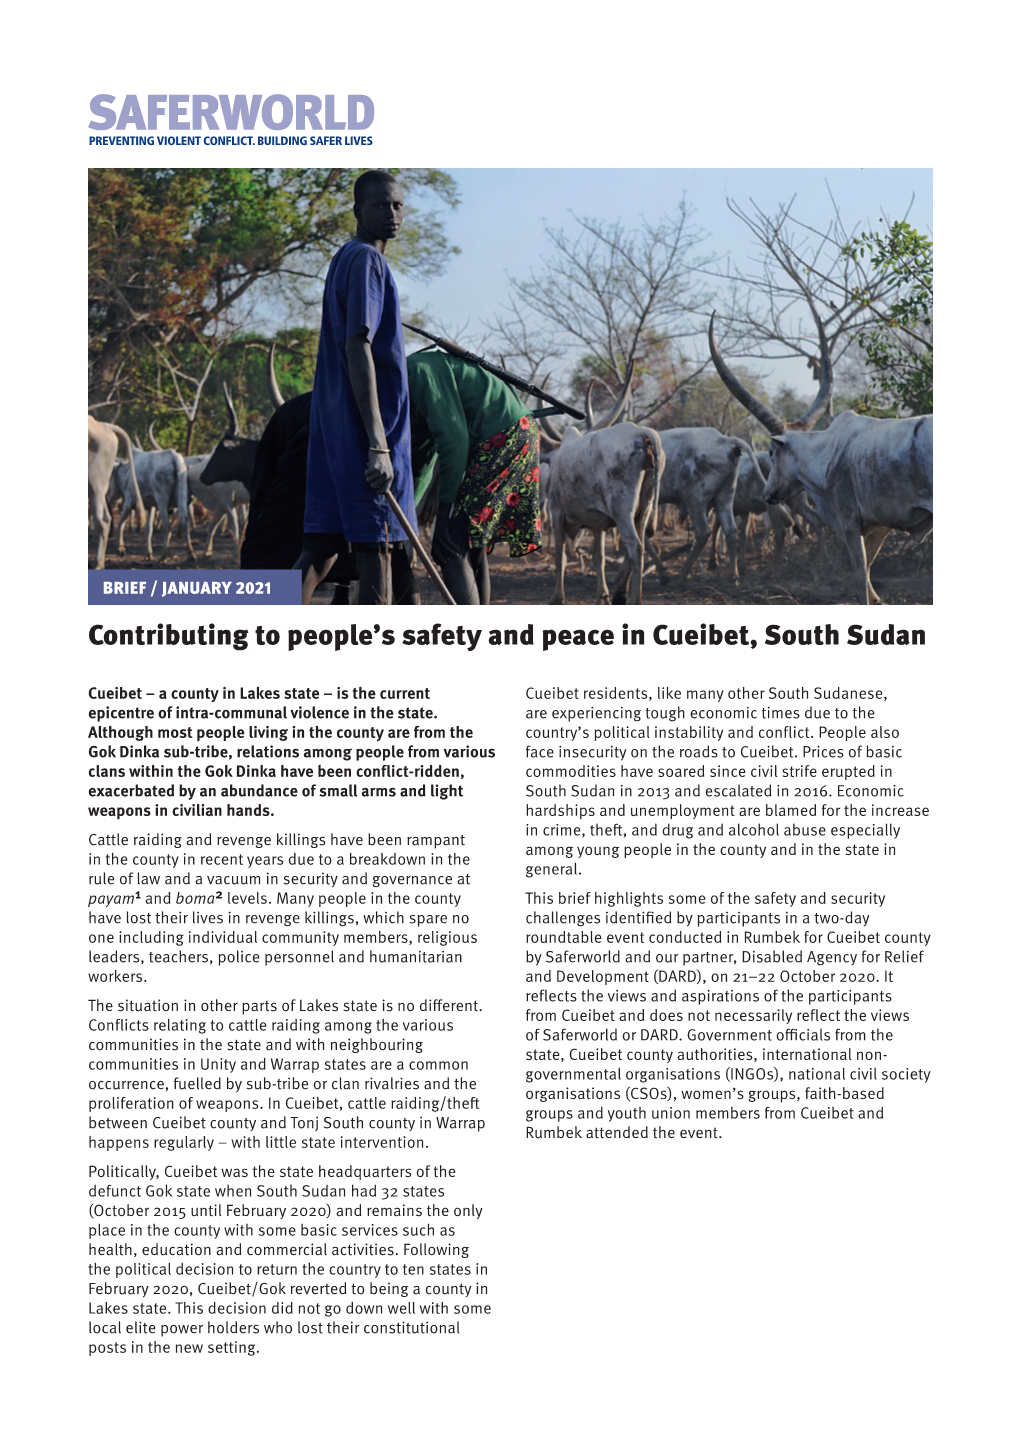 Contributing to People's Safety and Peace in Cueibet, South Sudan